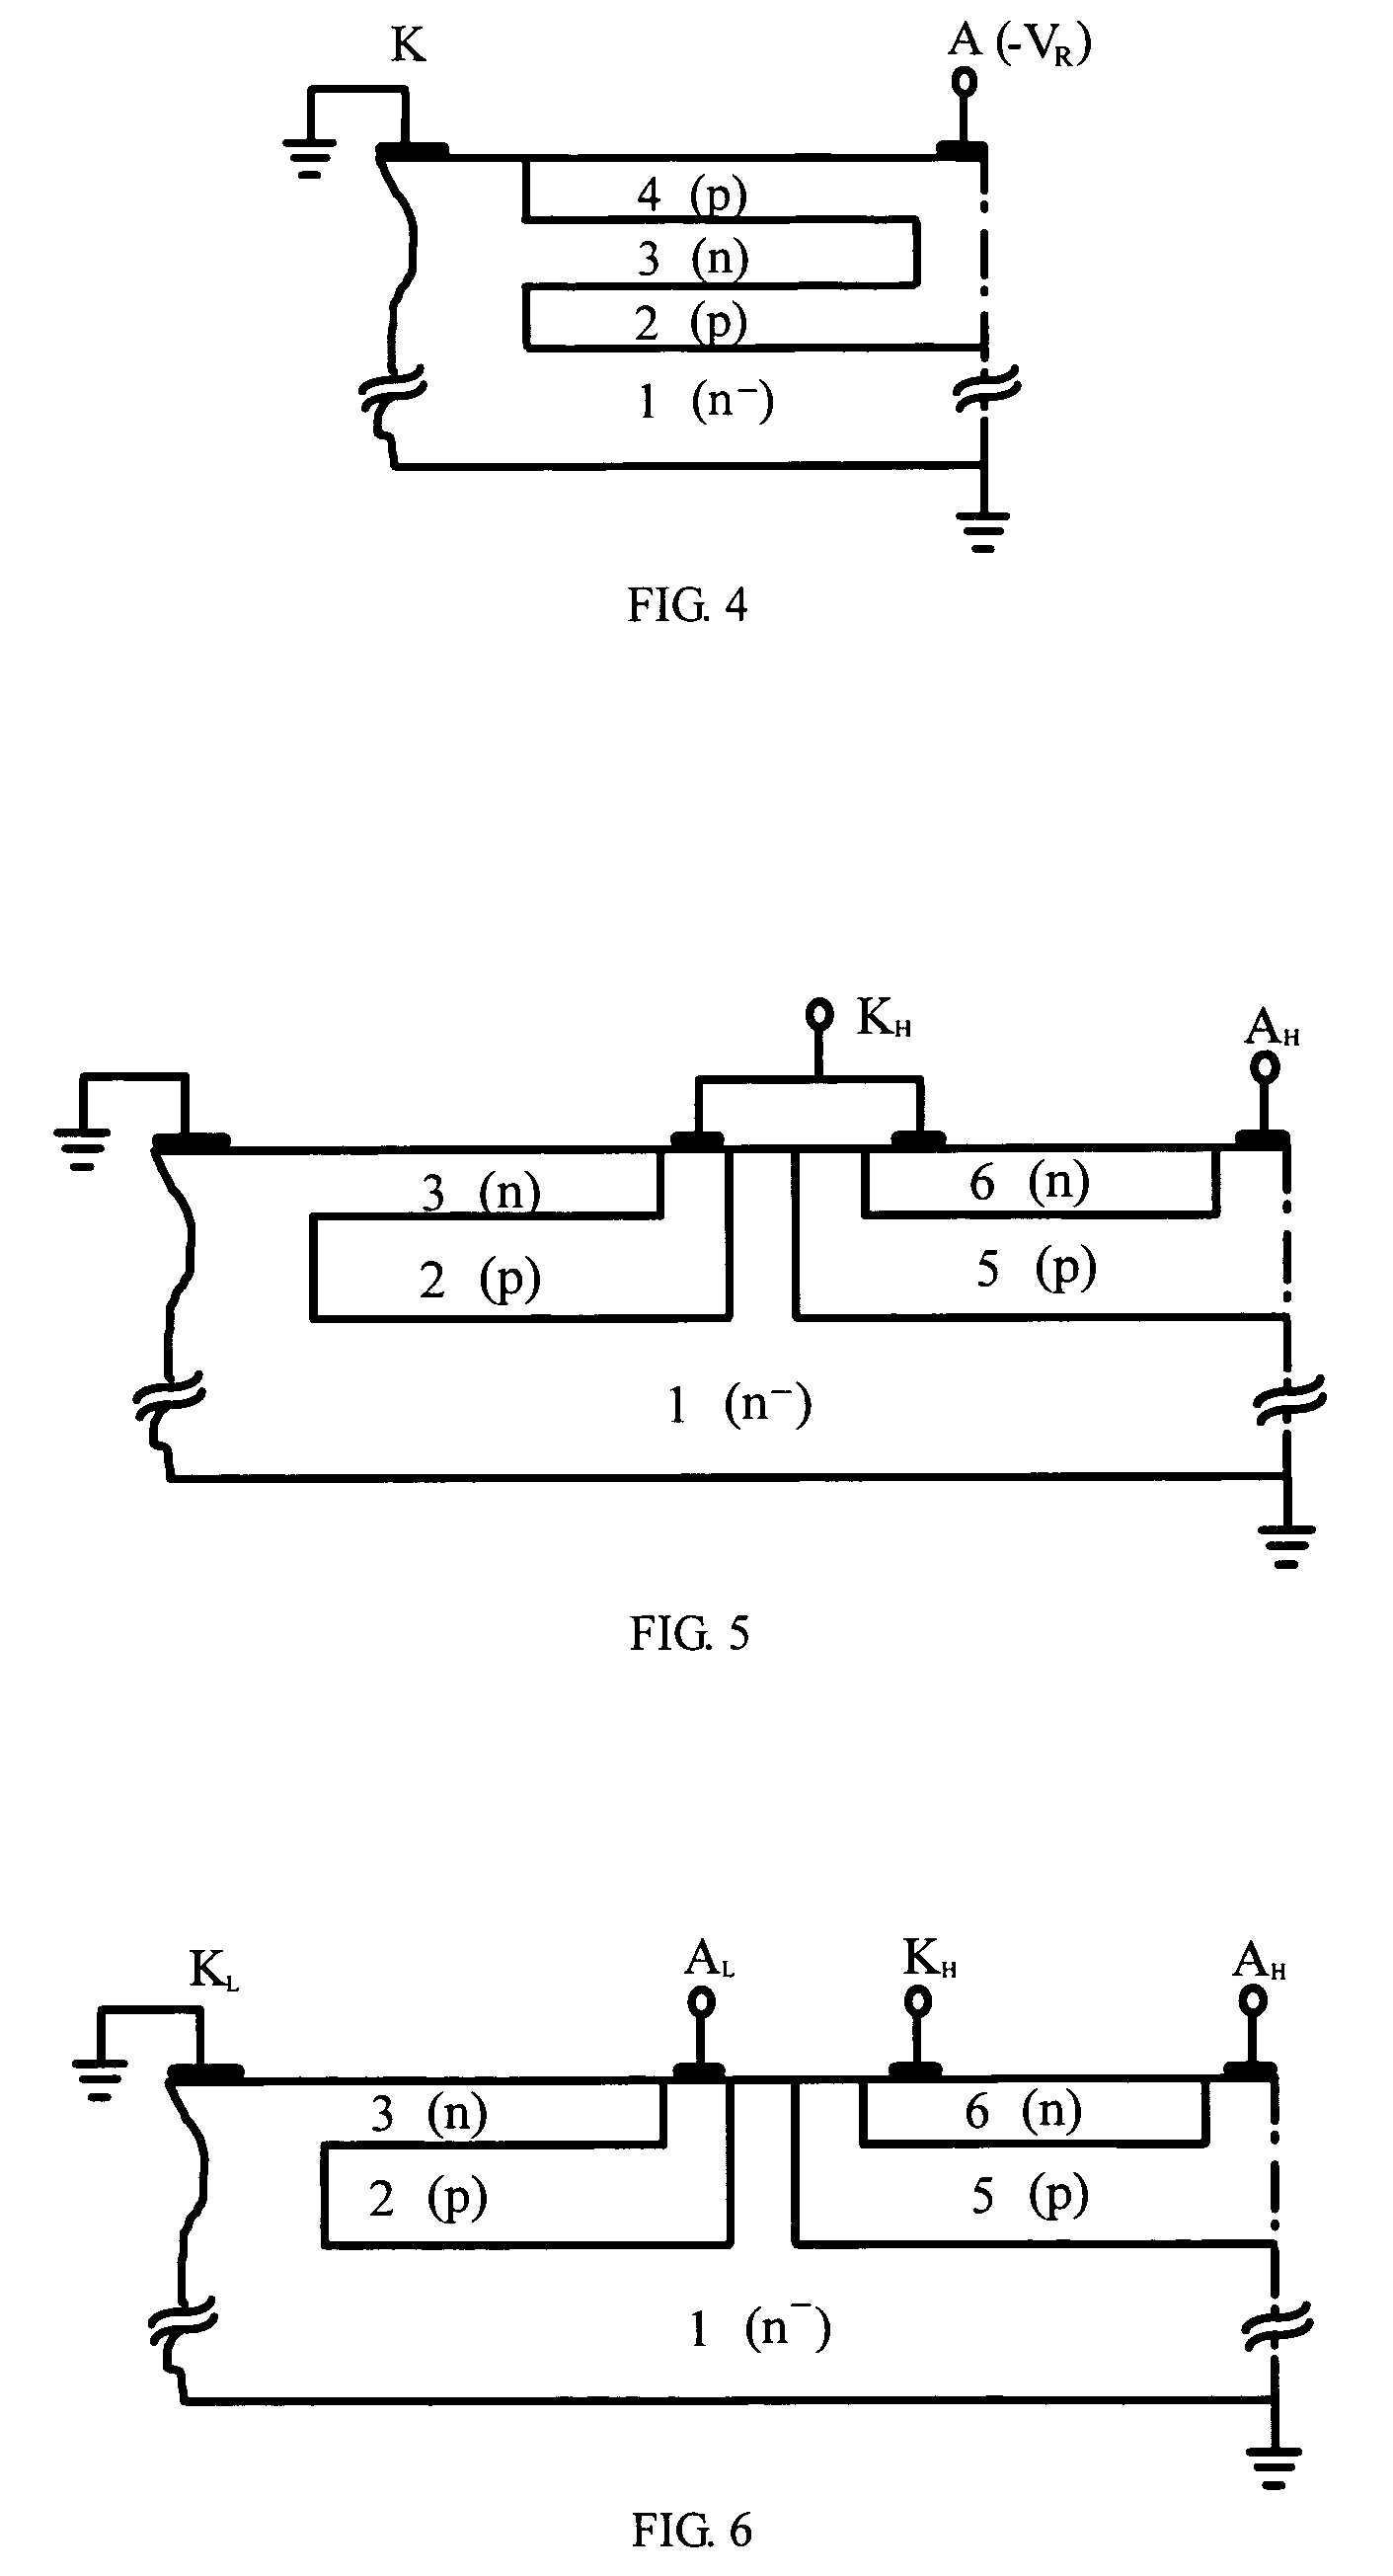 Lateral low-side and high-side high-voltage devices